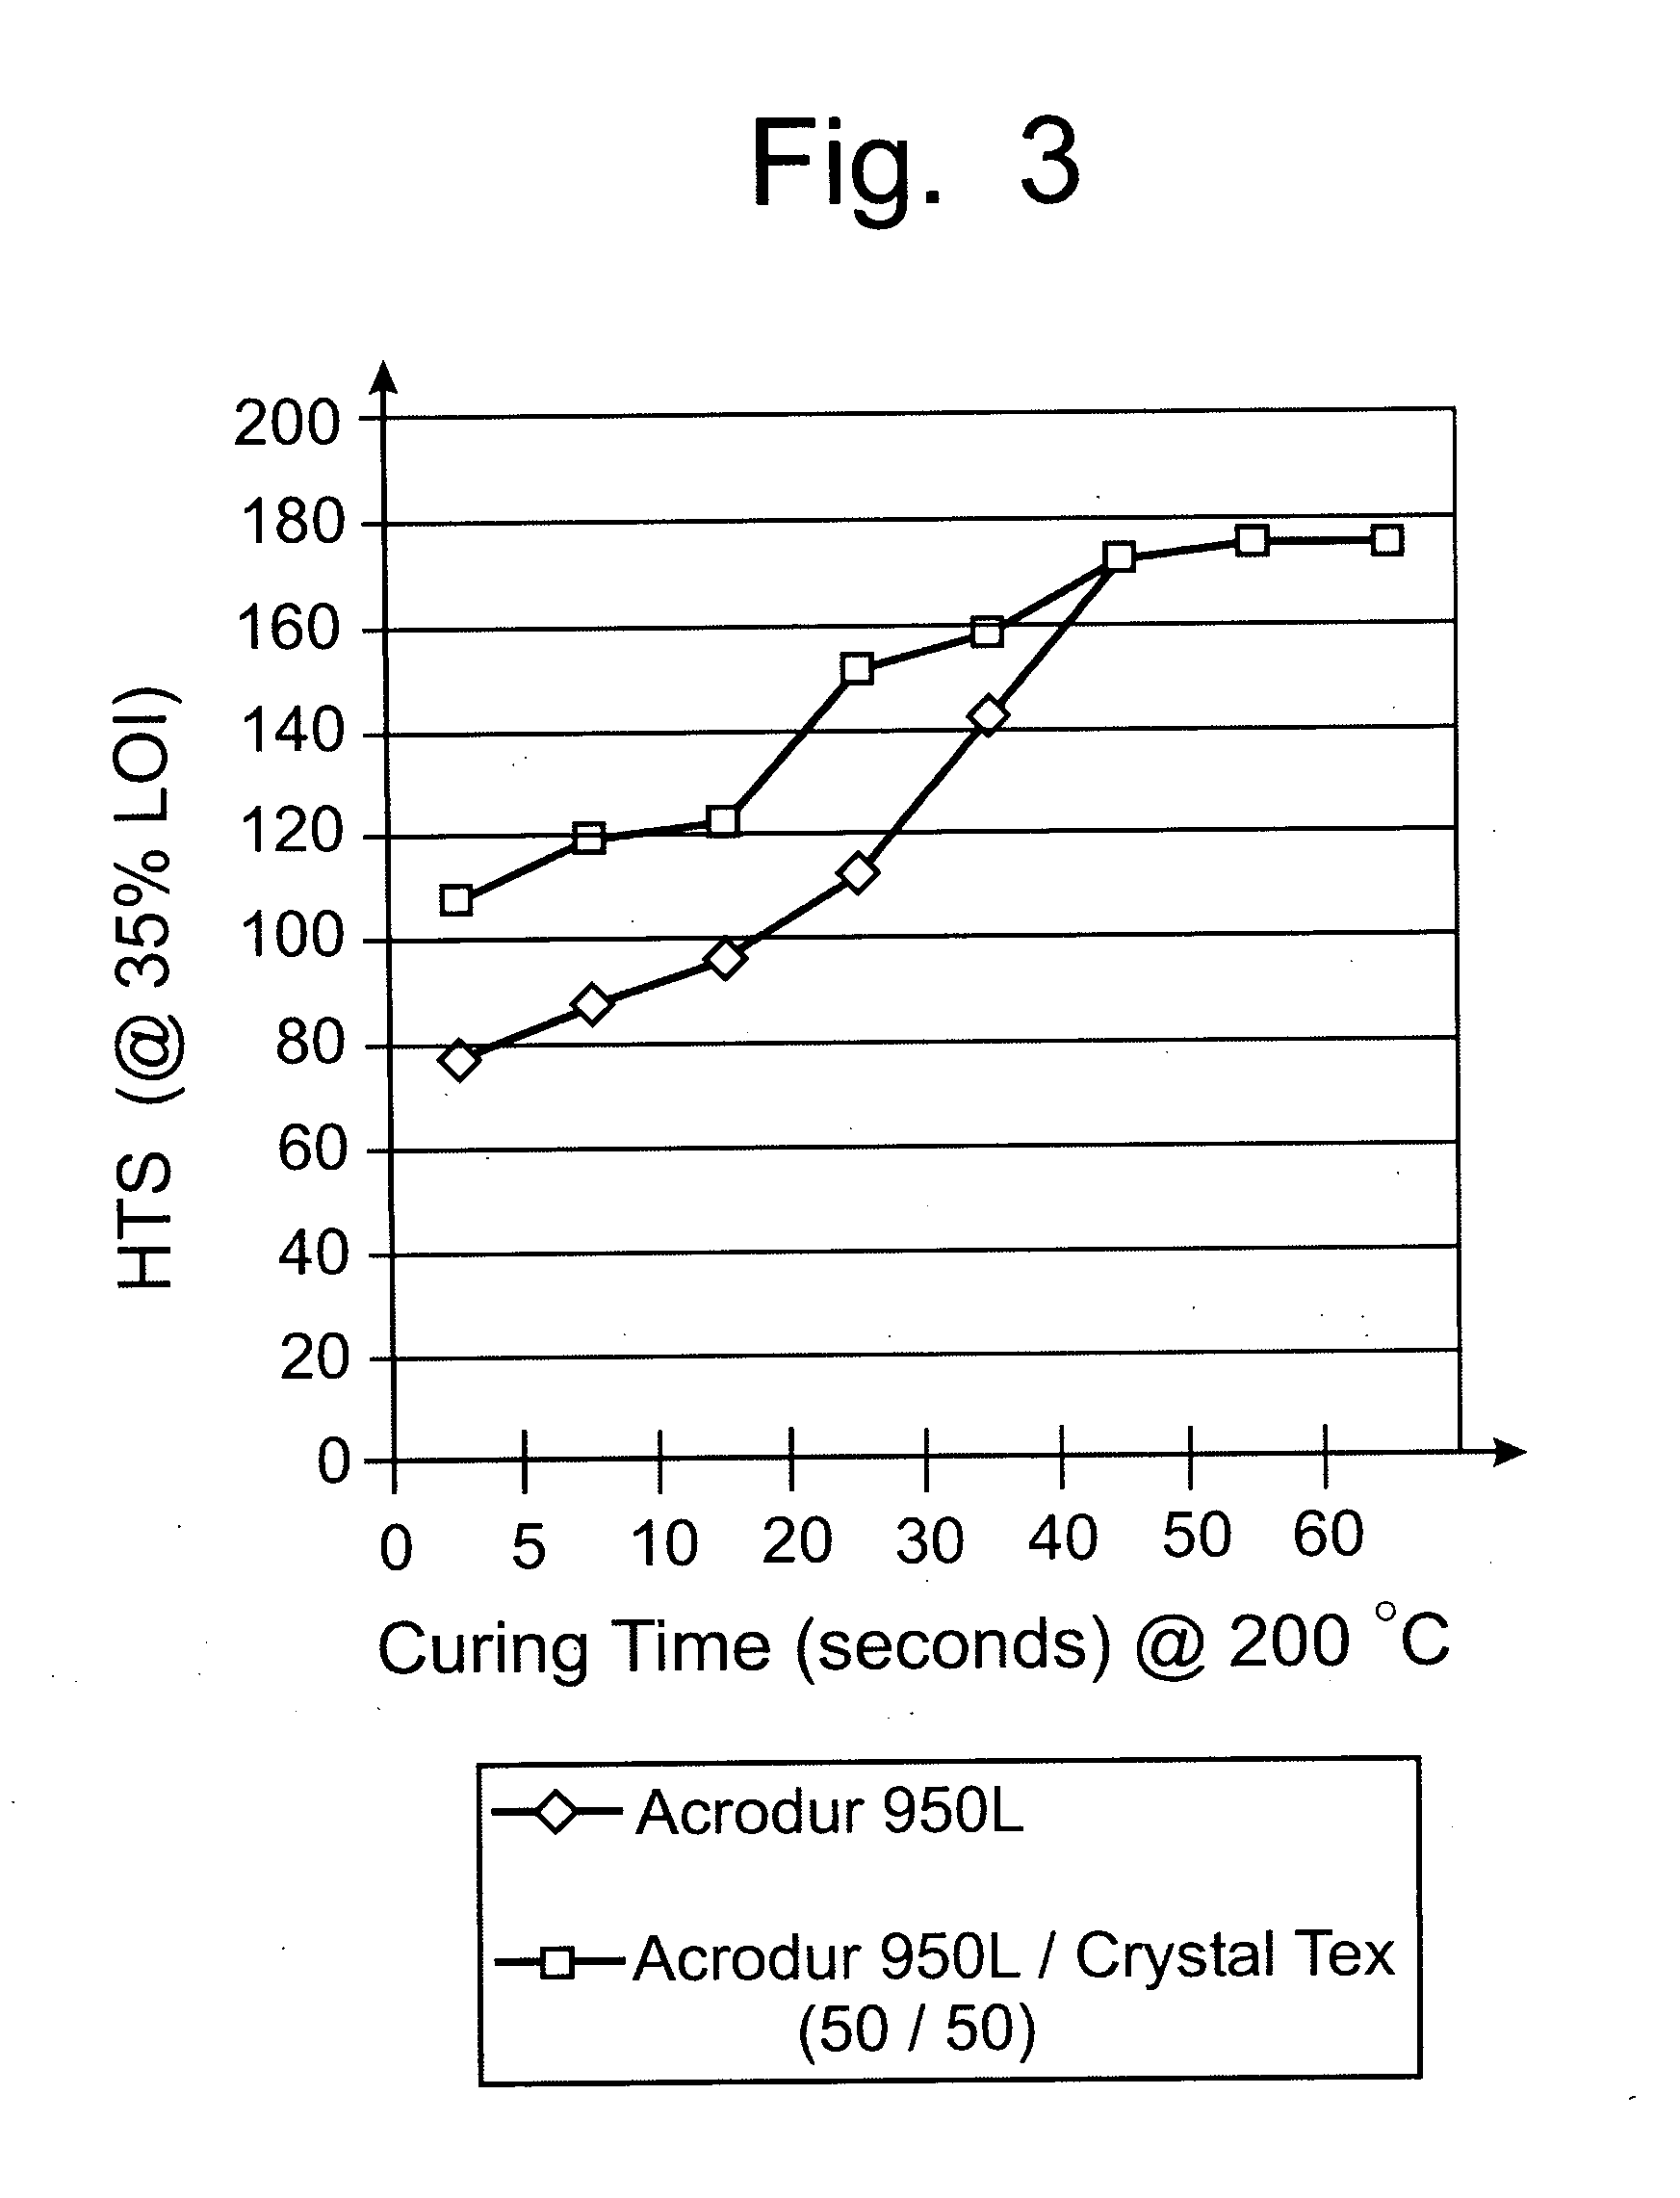 Dextrin binder composition for heat resistant non-wovens